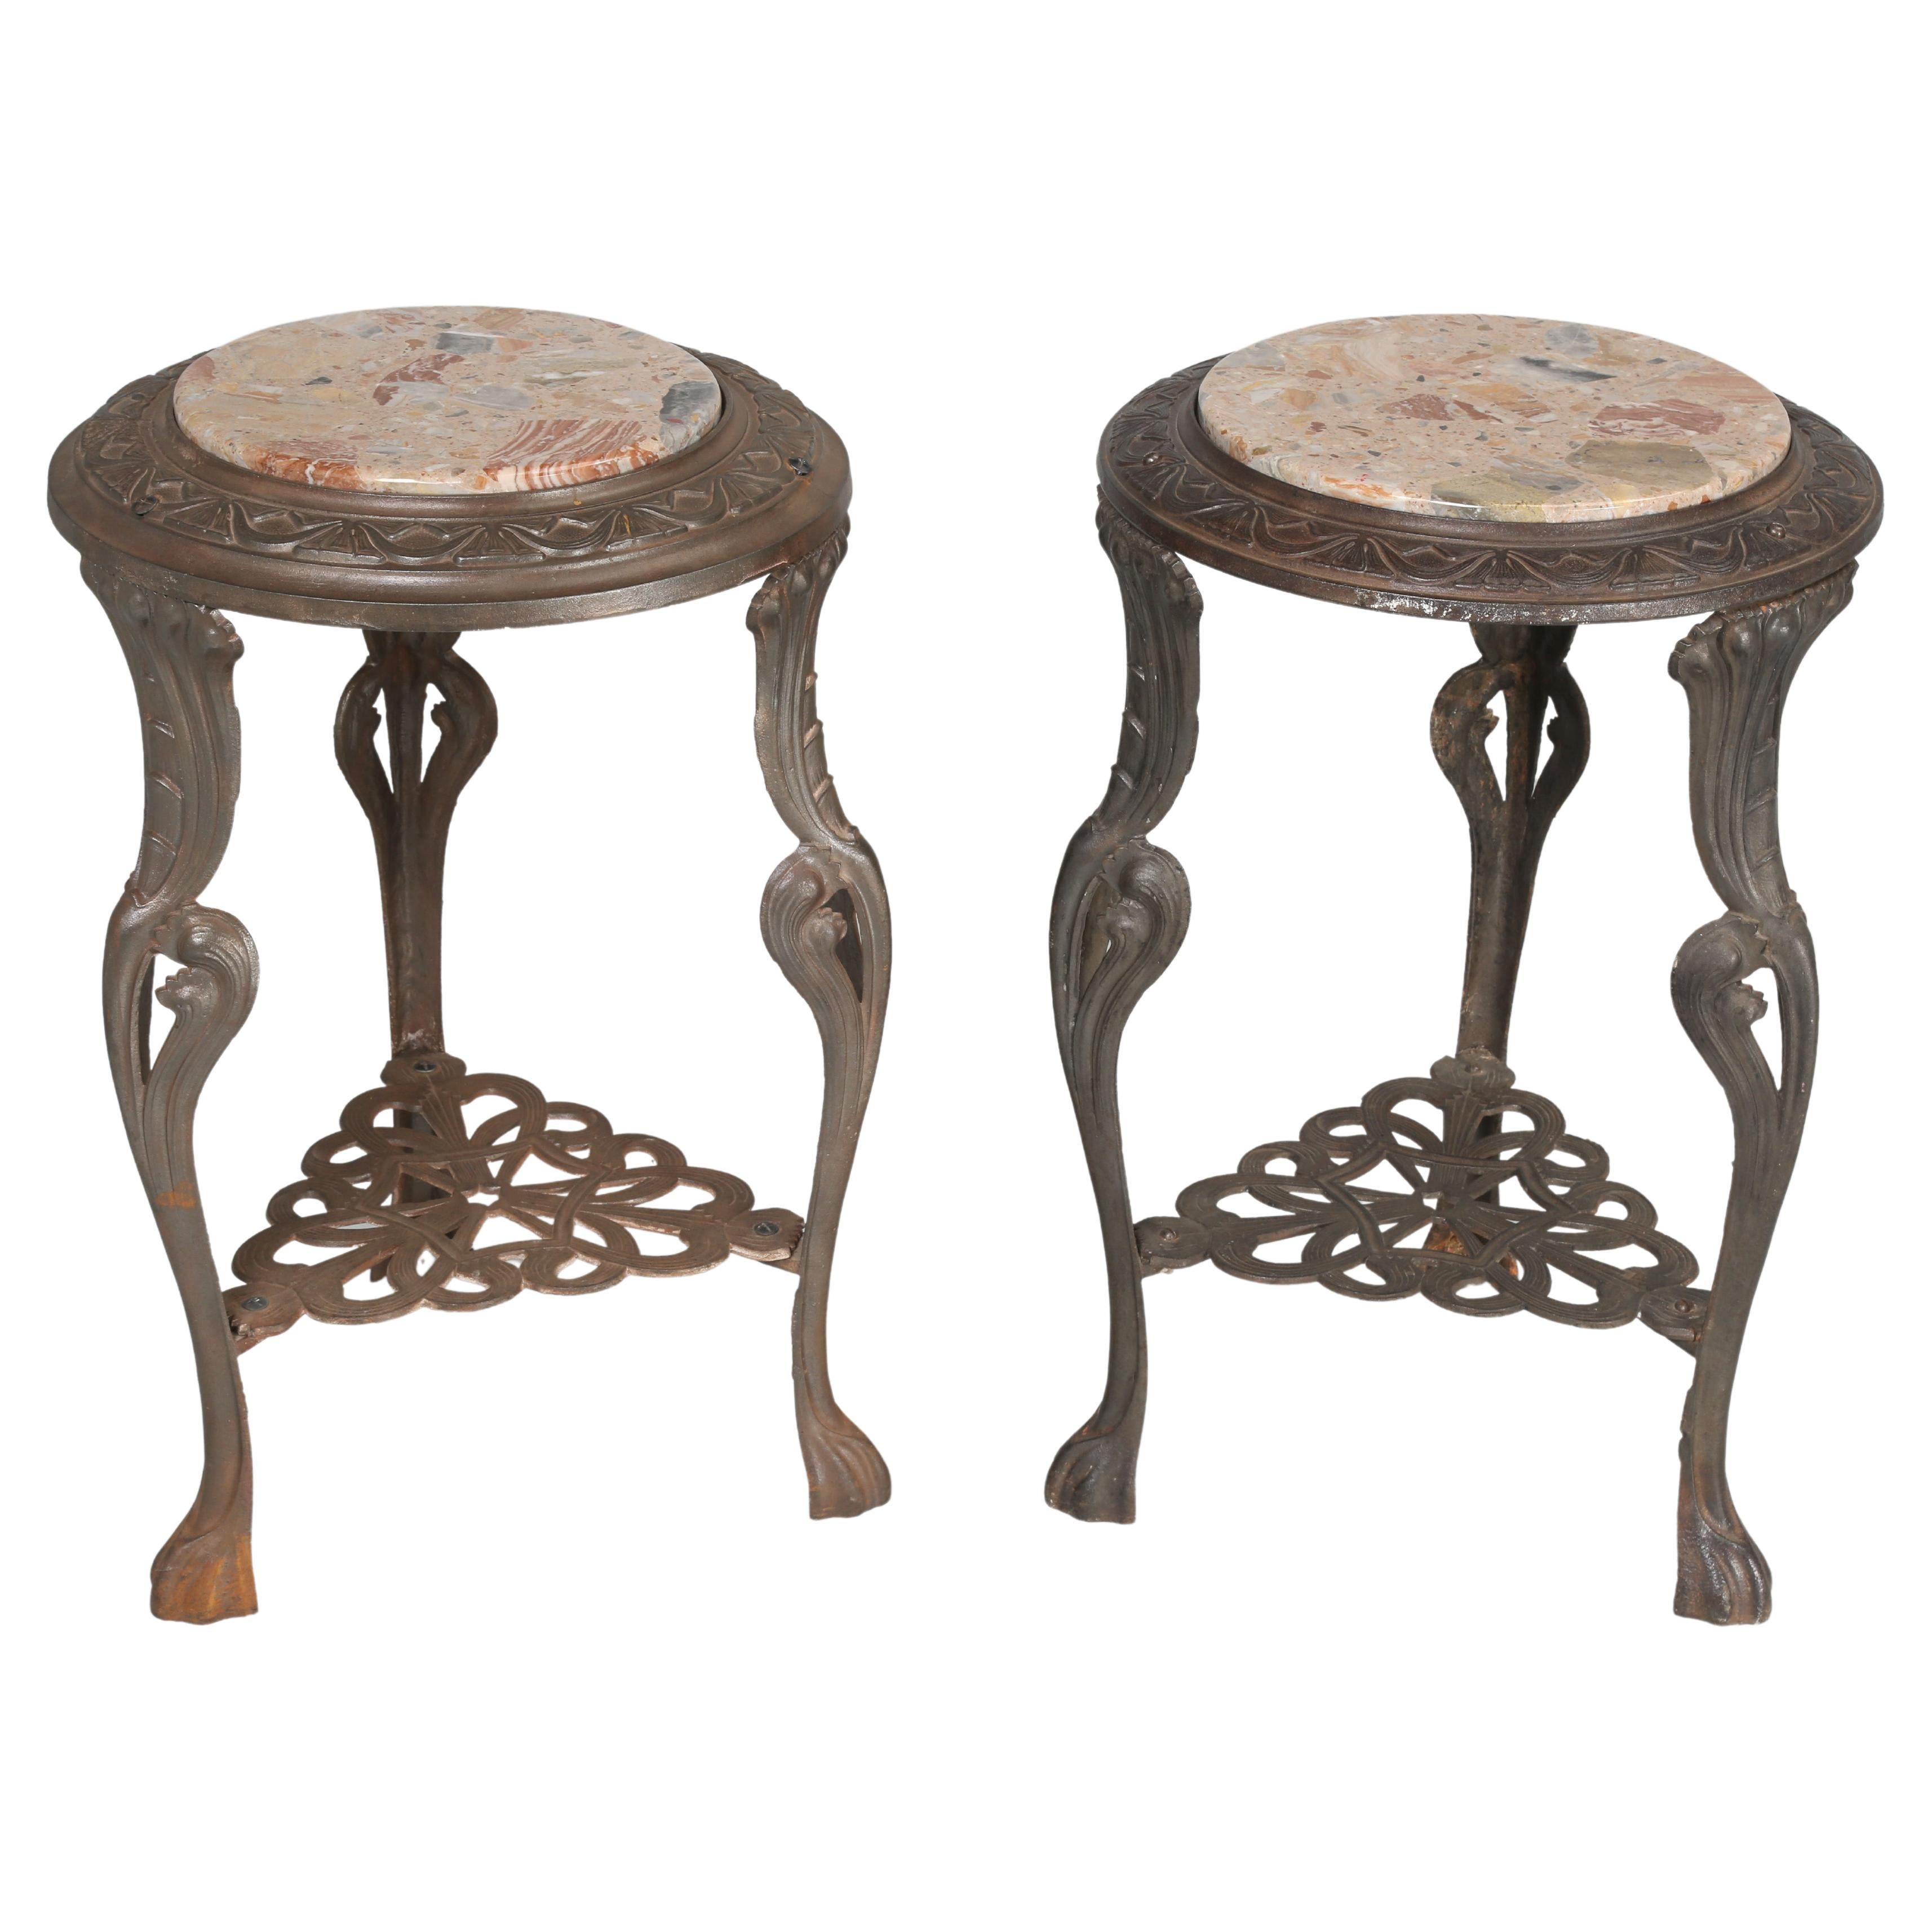 Near Pair of French Art Nouveau Guéridon Cast Iron Tables with Stone Tops